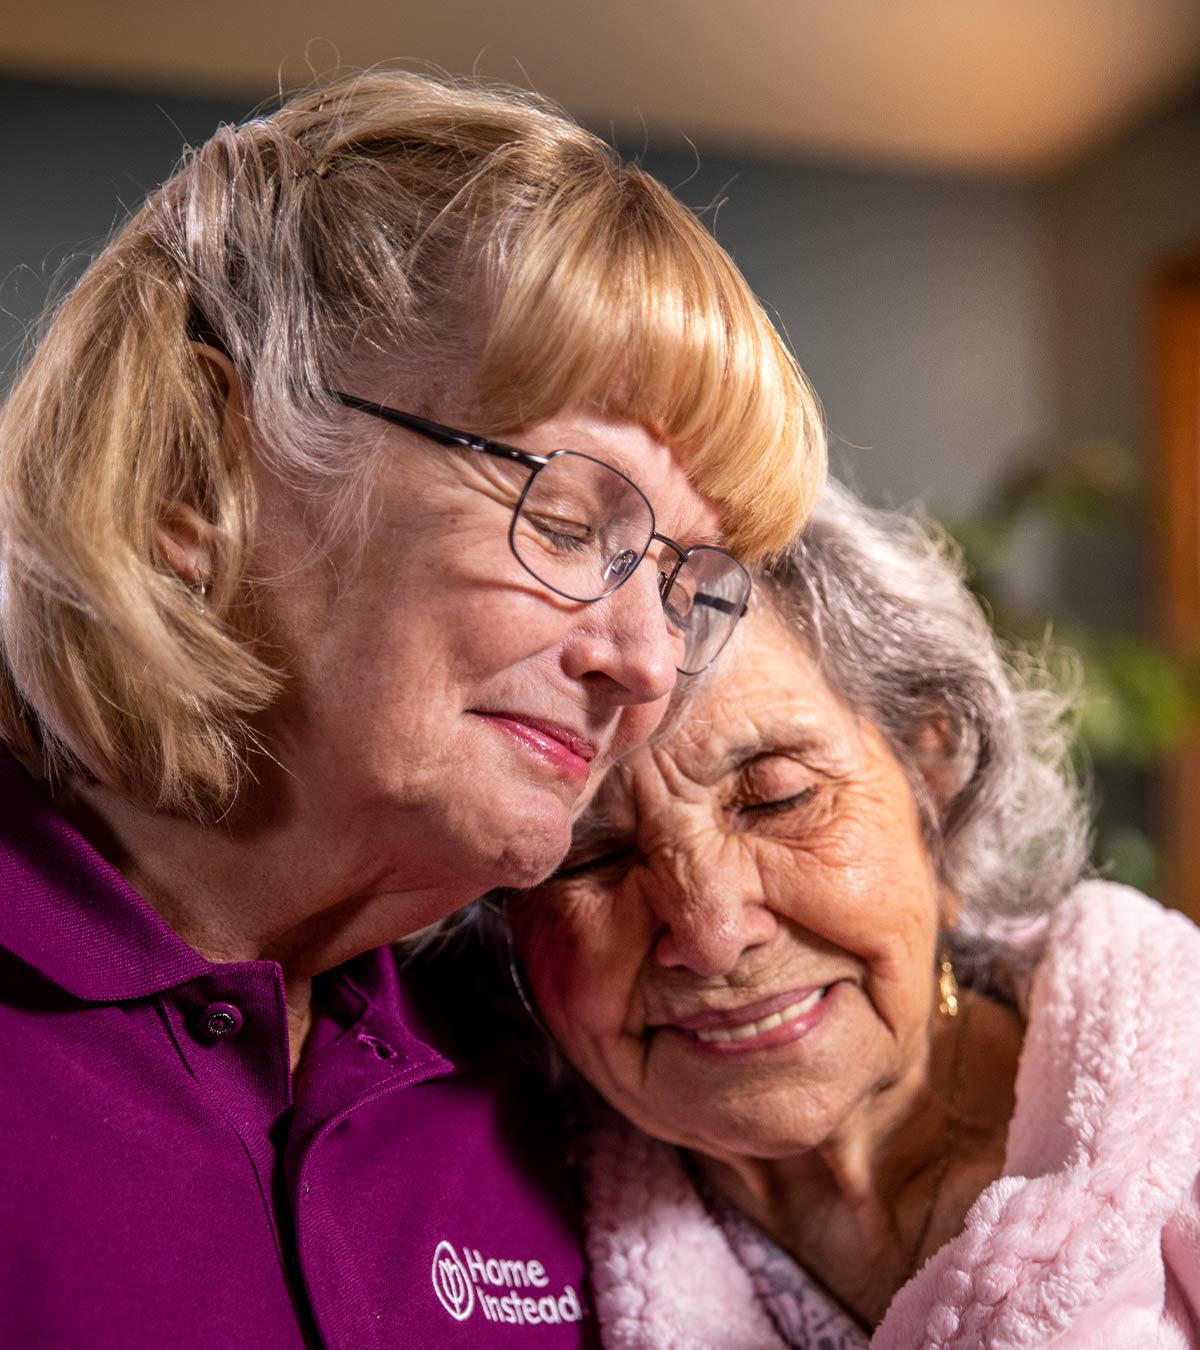 CAREGiver providing in-home senior care services. Home Instead of Tulsa, OK provides Elder Care to aging adults. 